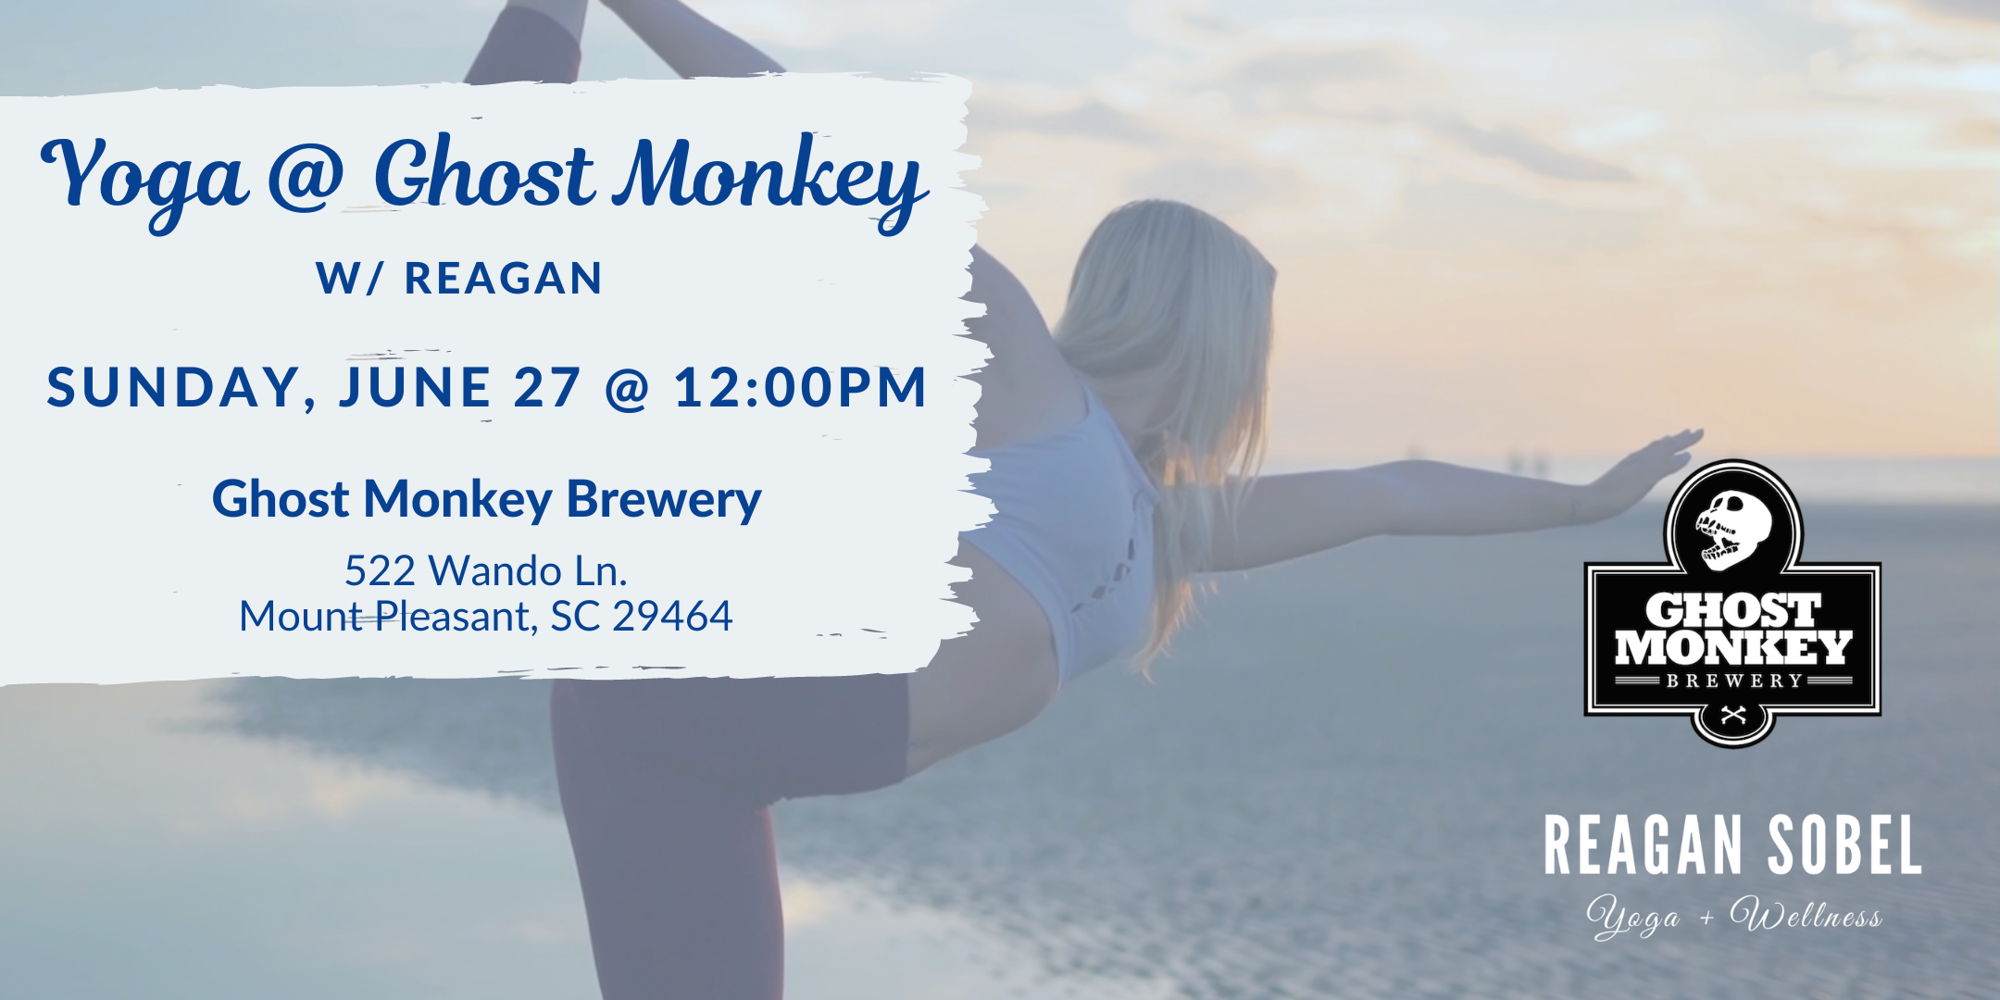 Outdoor Yoga at Ghost Monkey Brewery w/ Reagan Sobel promotional image